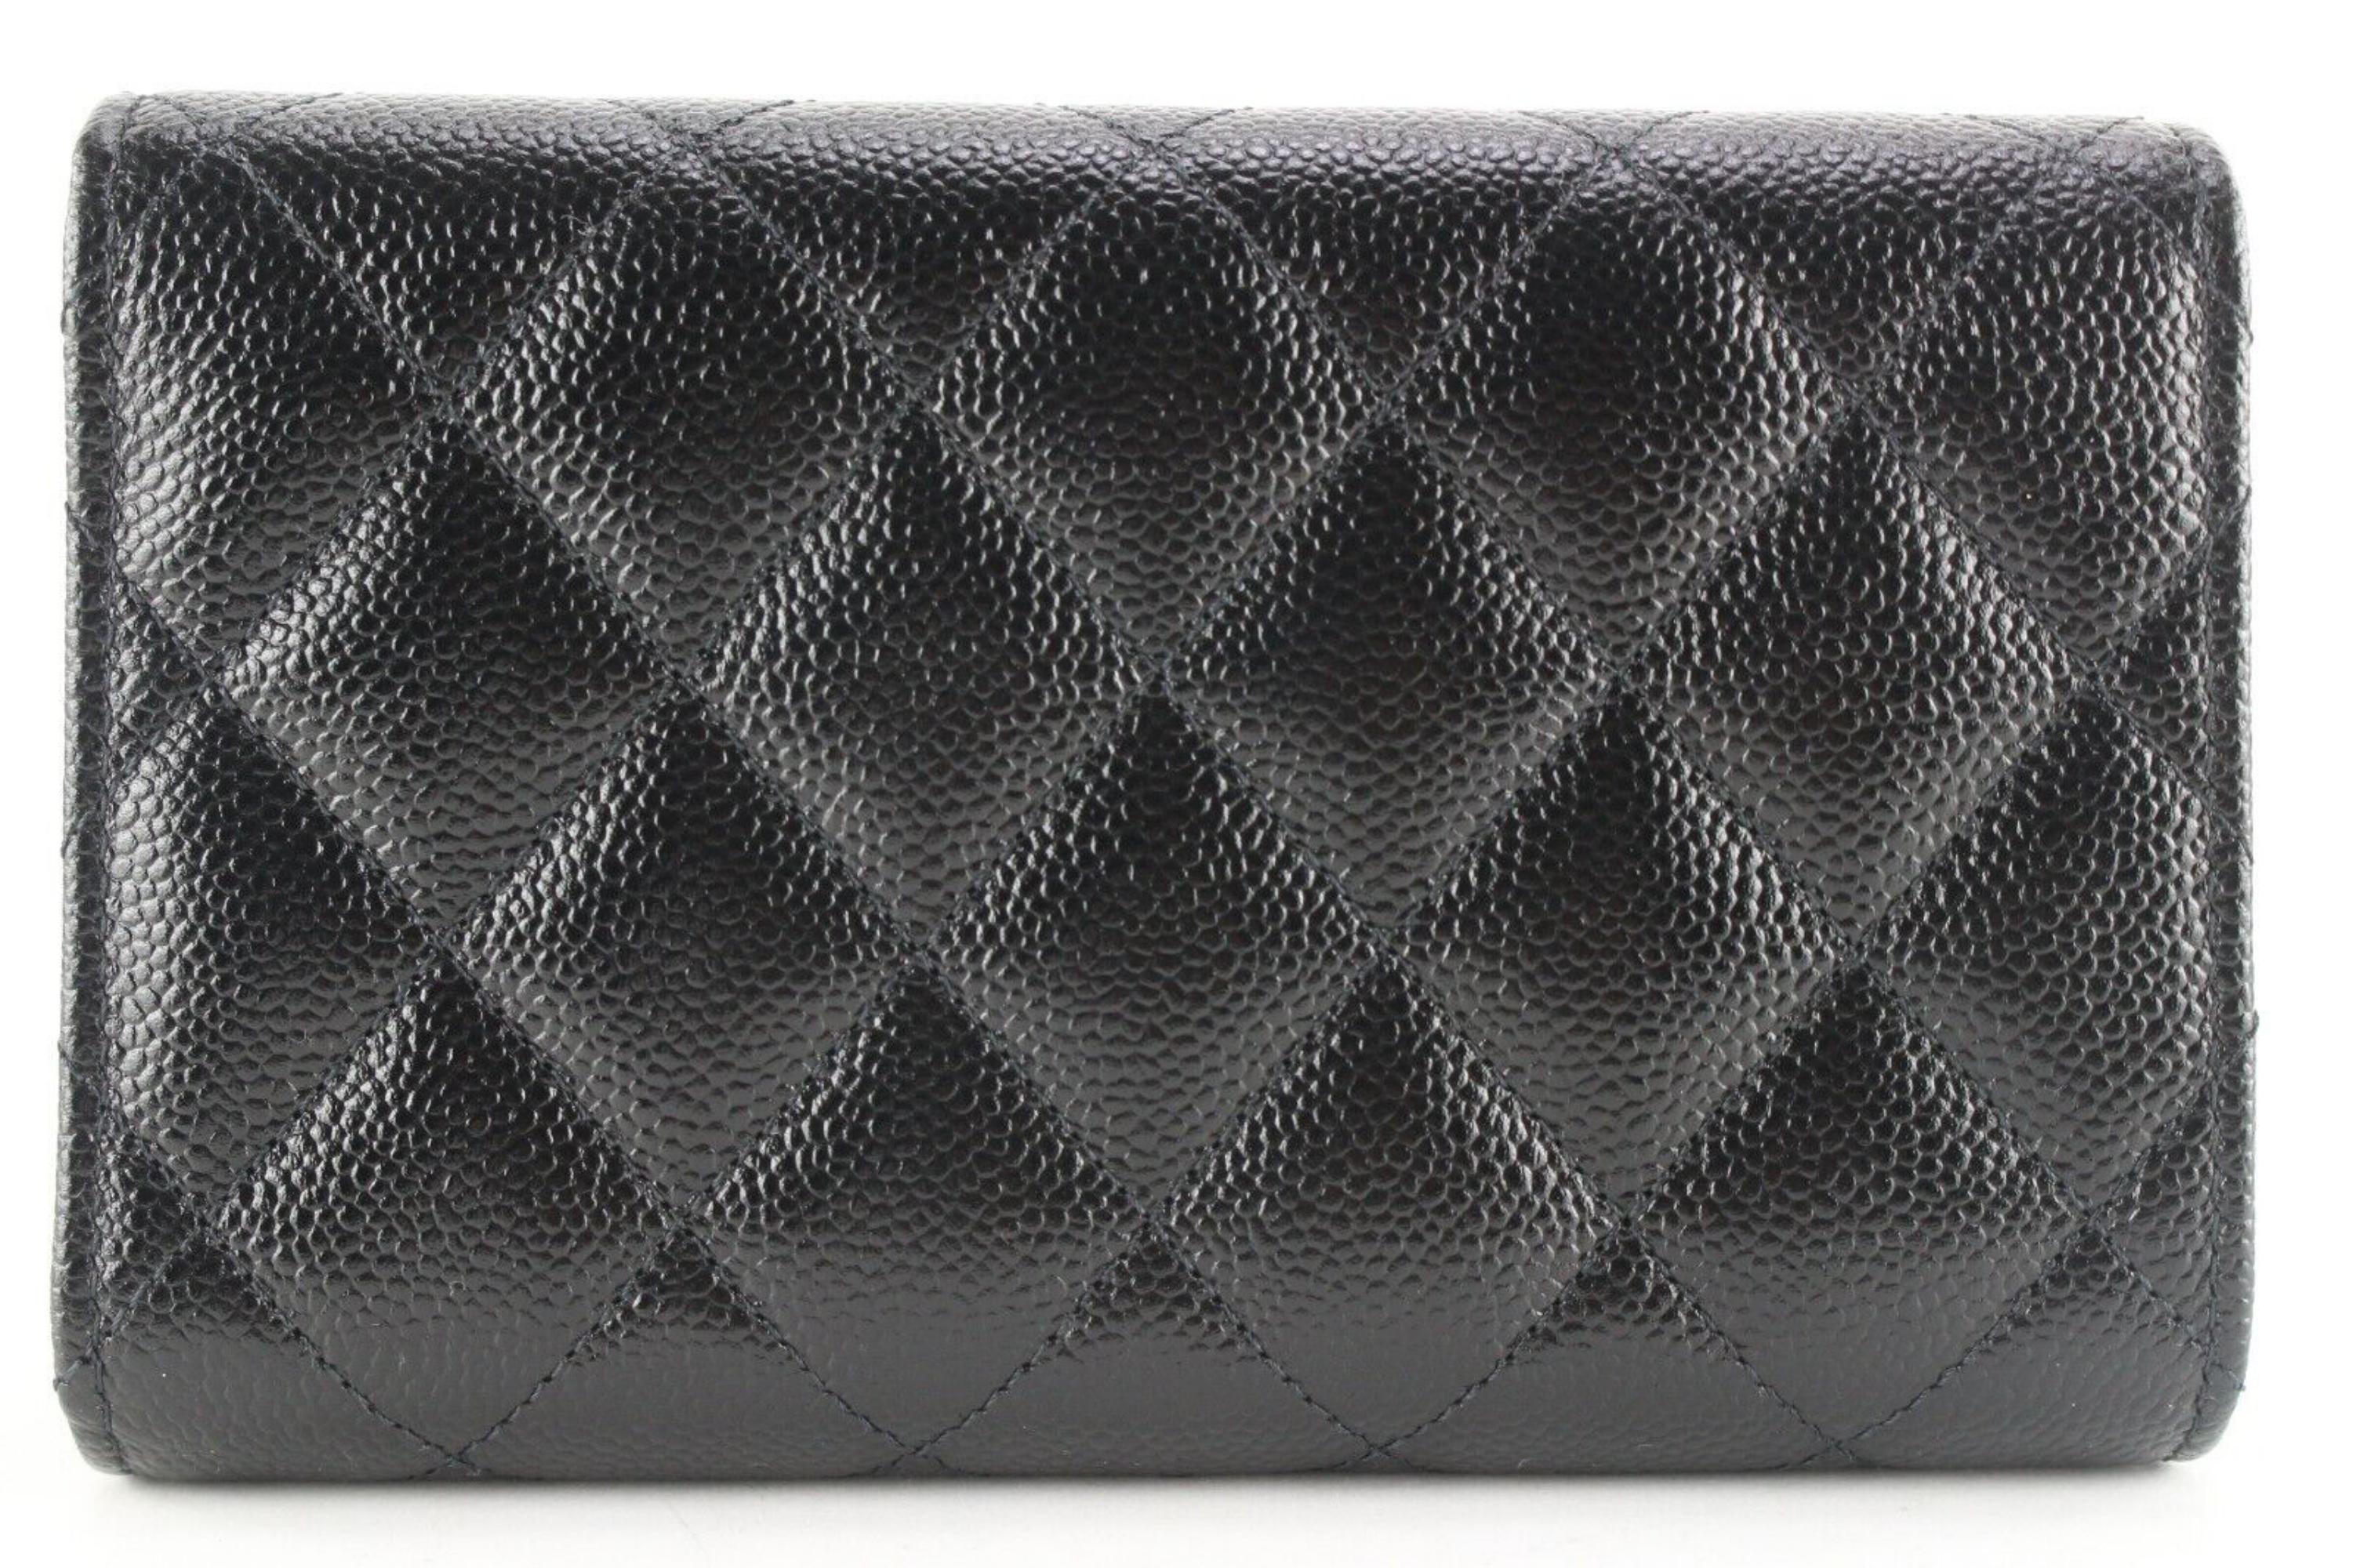 Chanel Black Quilted Caviar Leather Flap Wallet GHW 6CK0215 4